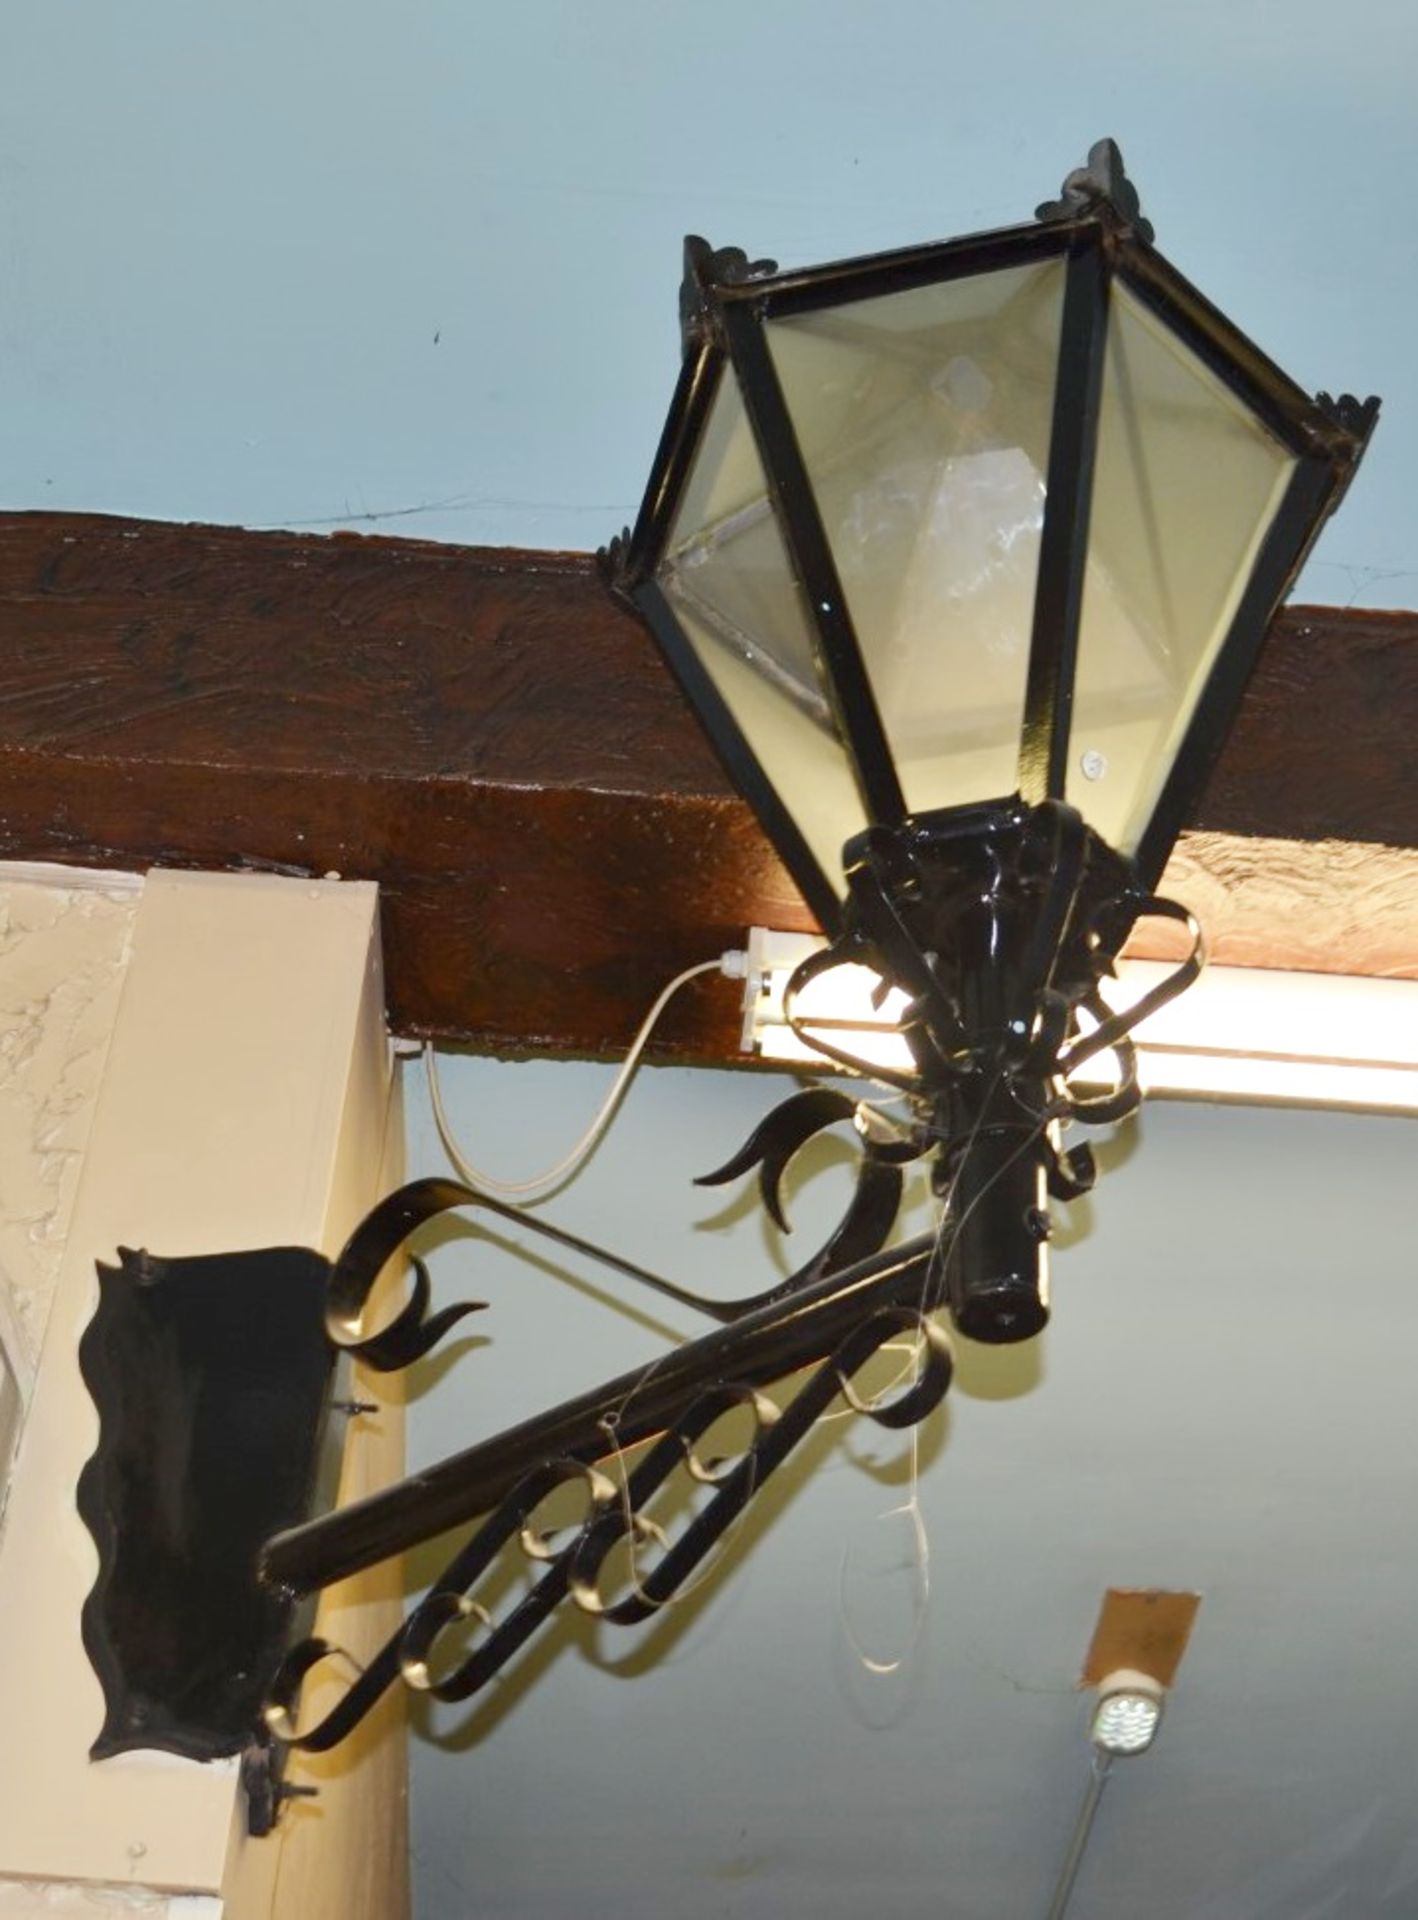 1 x Victorian Style Wall Lantern Light Fitting With Corner Bracket - Large Size in Black - Approx